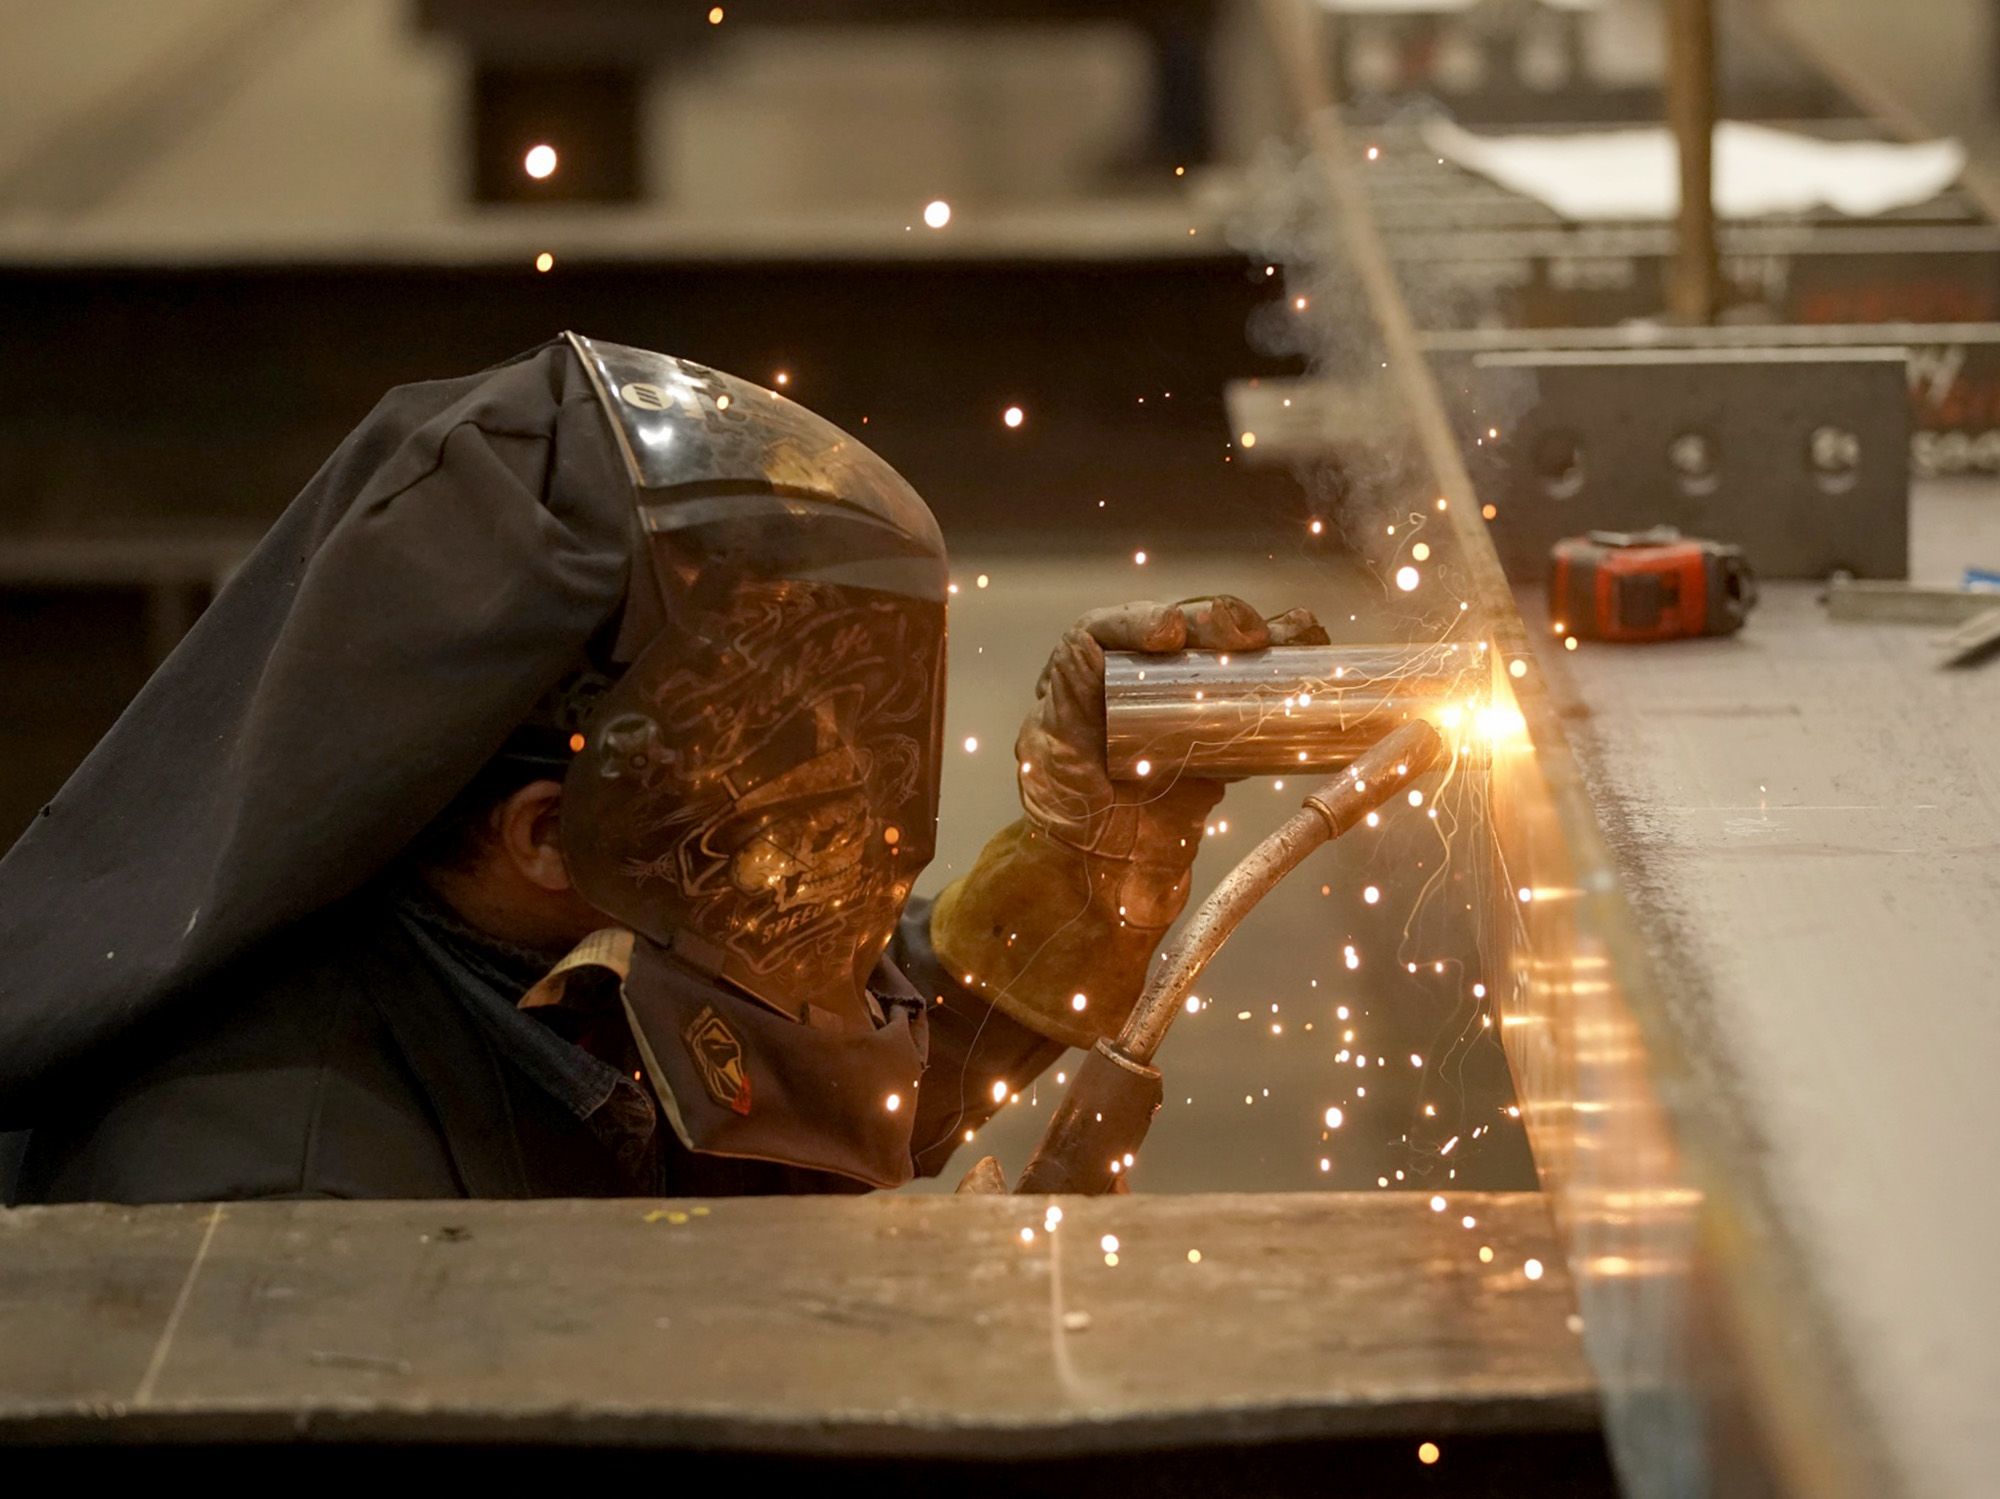 Photo: A worker welds a structural steel beam during production at a facility in West Jordan, Utah. Photographer: George Frey/Bloomberg.